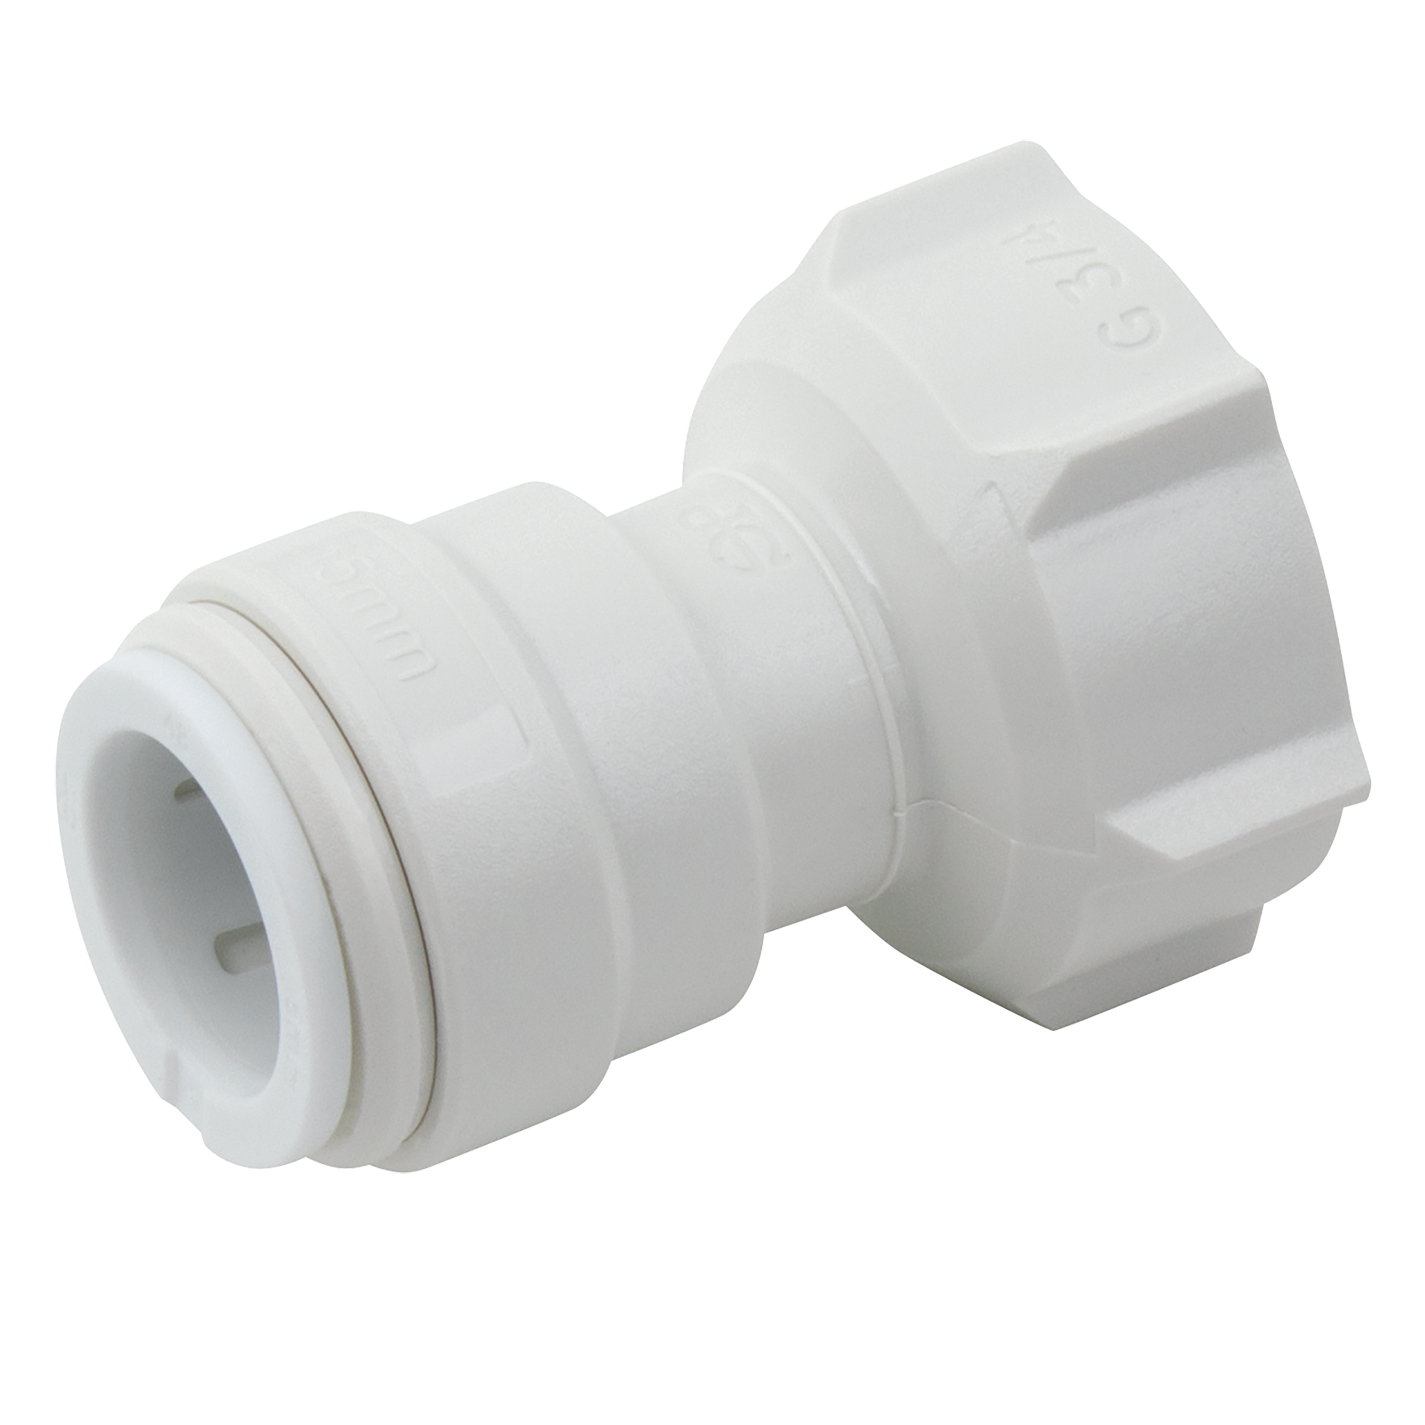 15 X 3/4" FEMALE COUPLER/TAP CONNECTOR